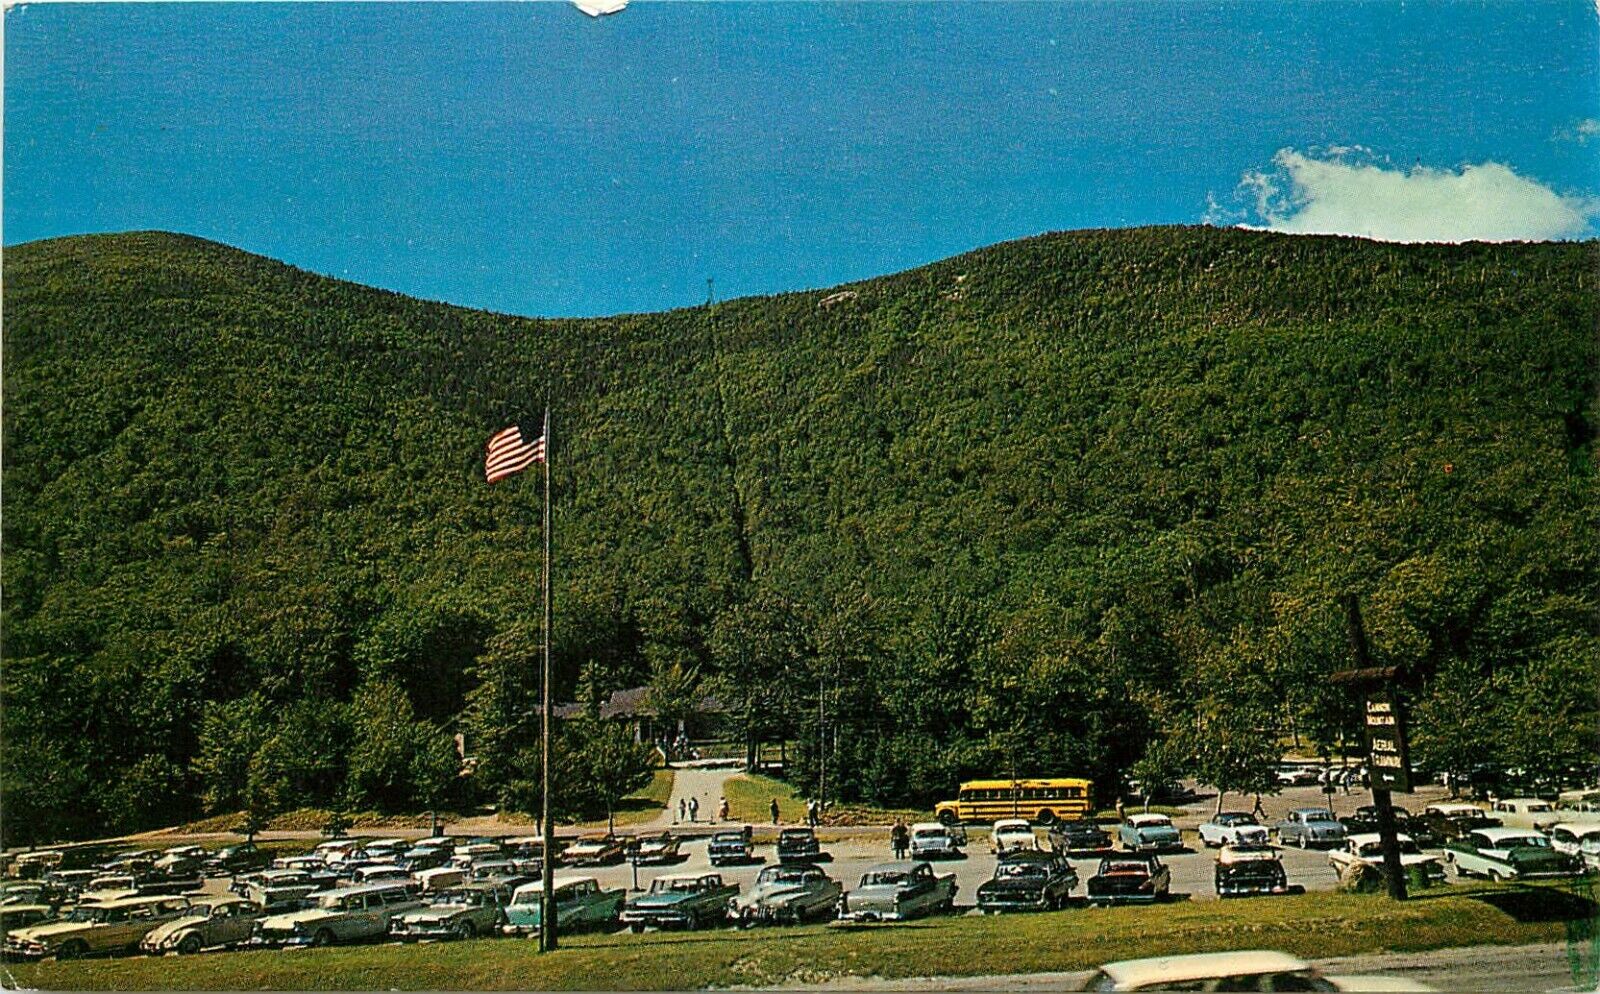 Valley Station Parking Area Annon Mountain Tramway Franconia Notch NH Poscard